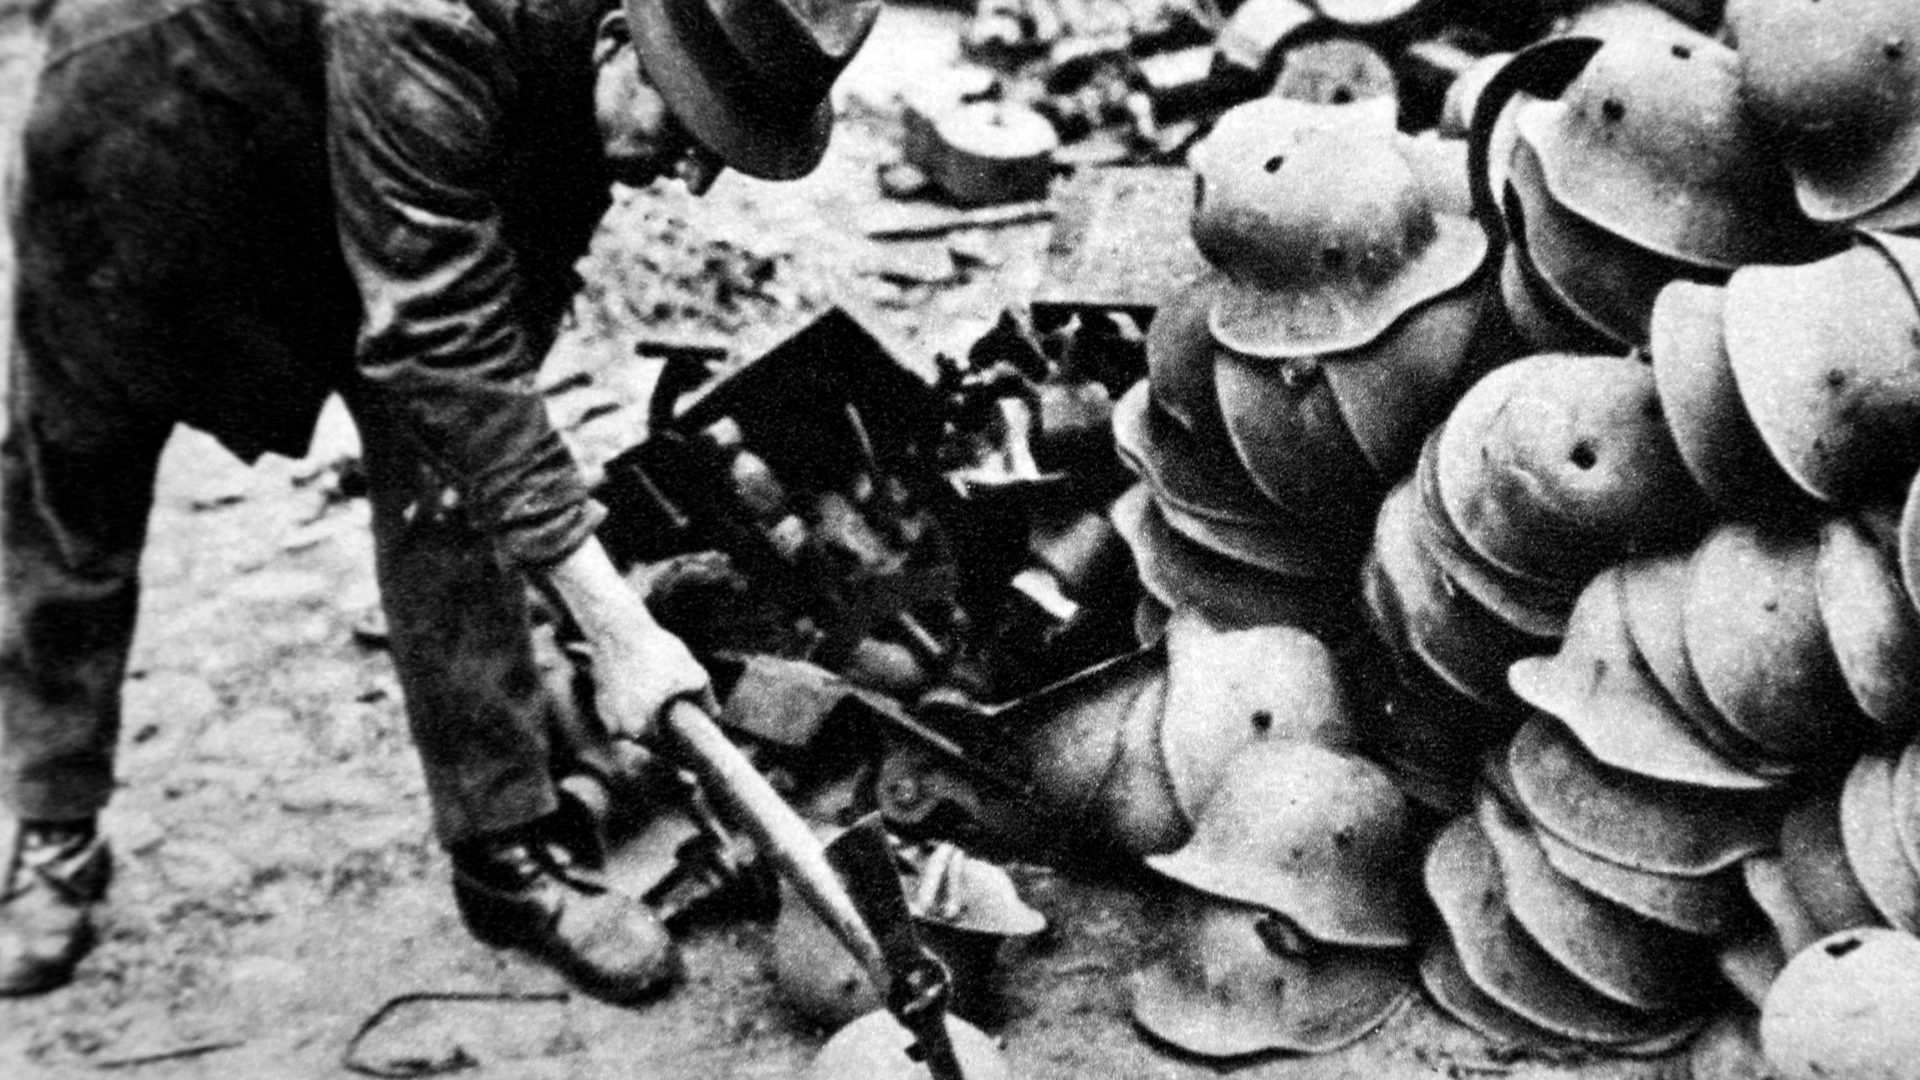 German infantry helmets are destroyed in 1919 under the terms of the Treaty of Versailles. This week 
Germany woke up to its 
military responsibility in defending Europe. Photo: Historica Graphica